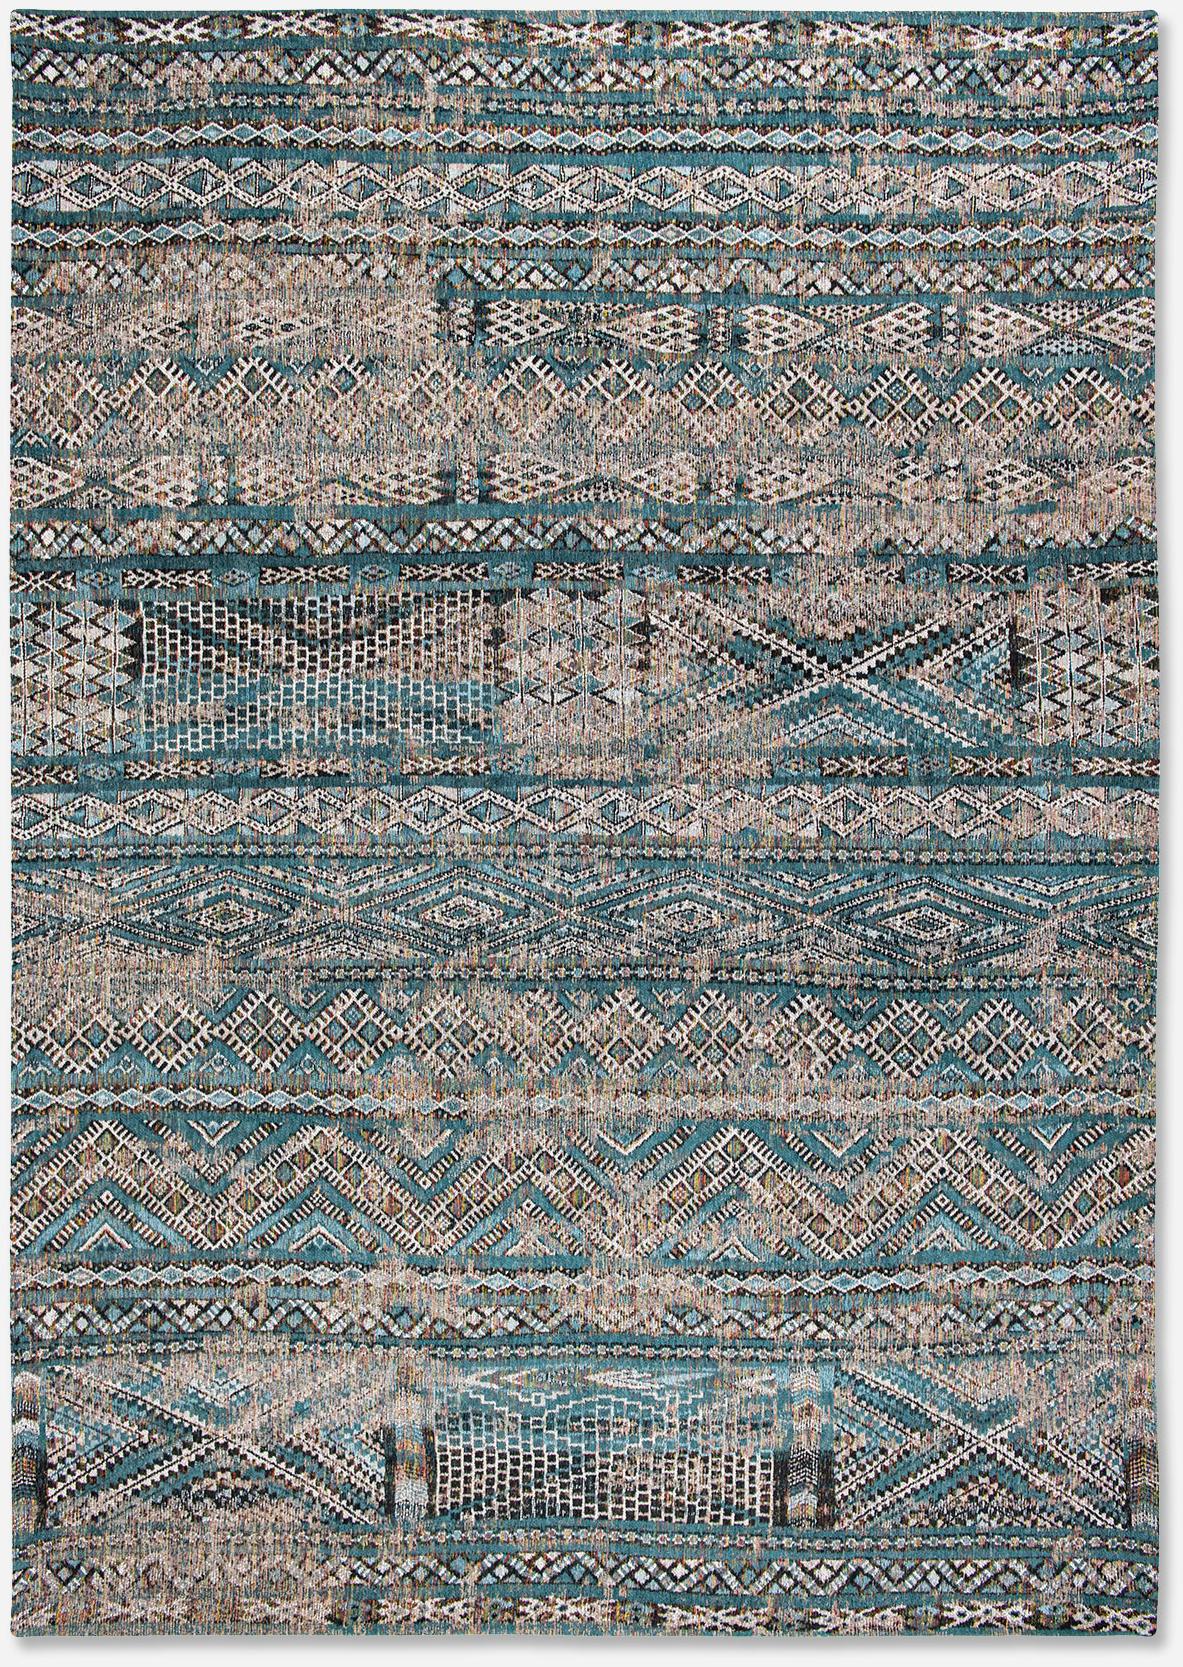 Antiquarian Flatwoven Rug ☞ Size: 4' 7" x 6' 7" (140 x 200 cm)